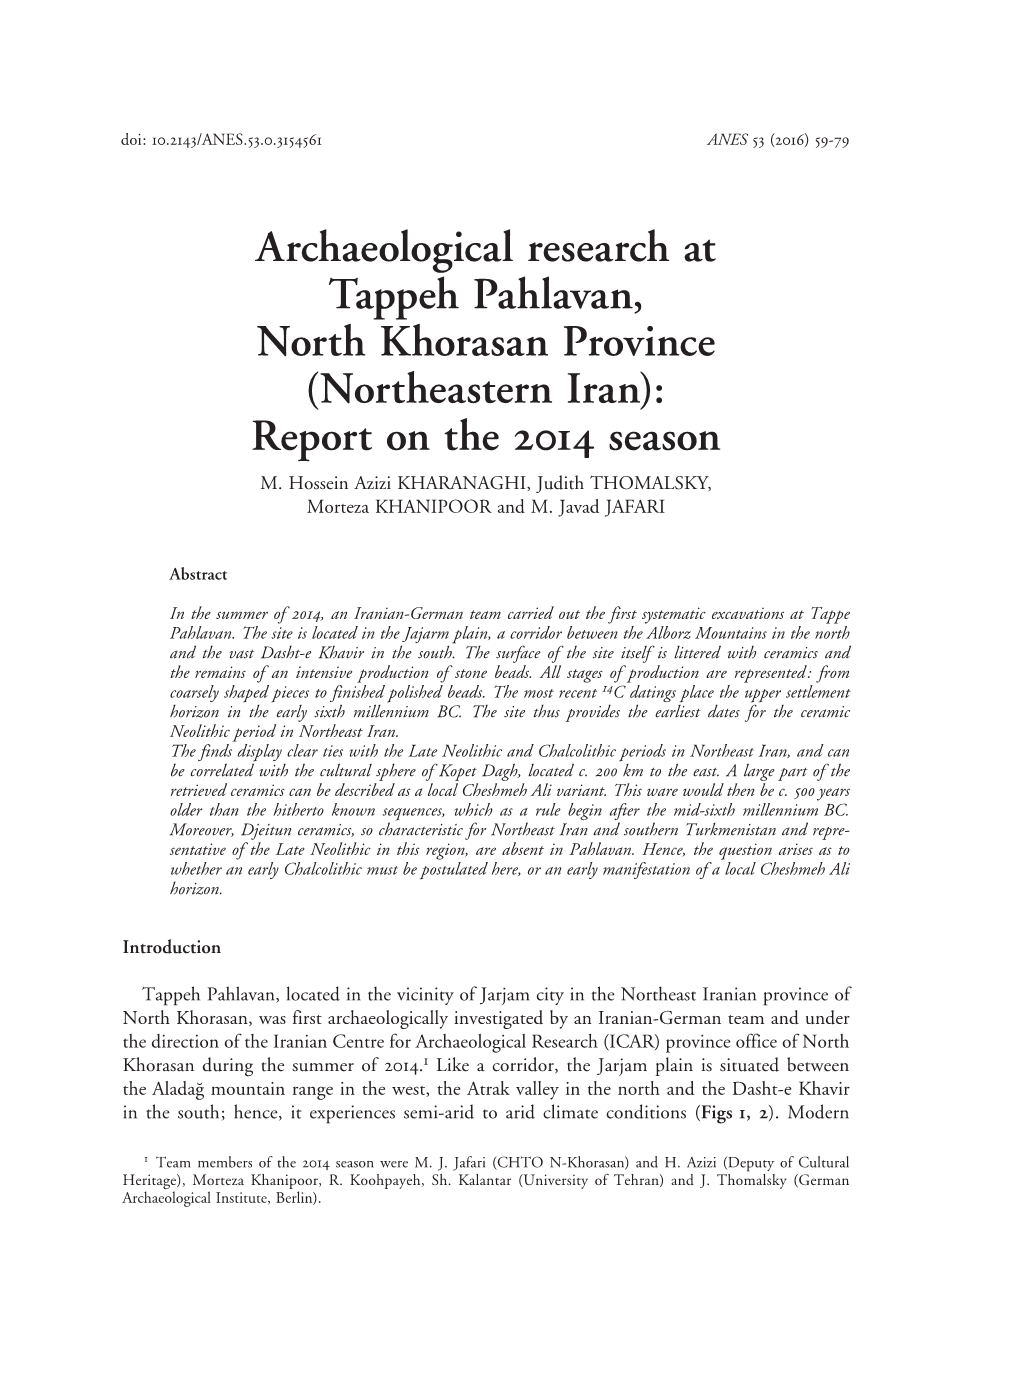 Archaeological Research at Tappeh Pahlavan, North Khorasan Province (Northeastern Iran): Report on the 2014 Season M